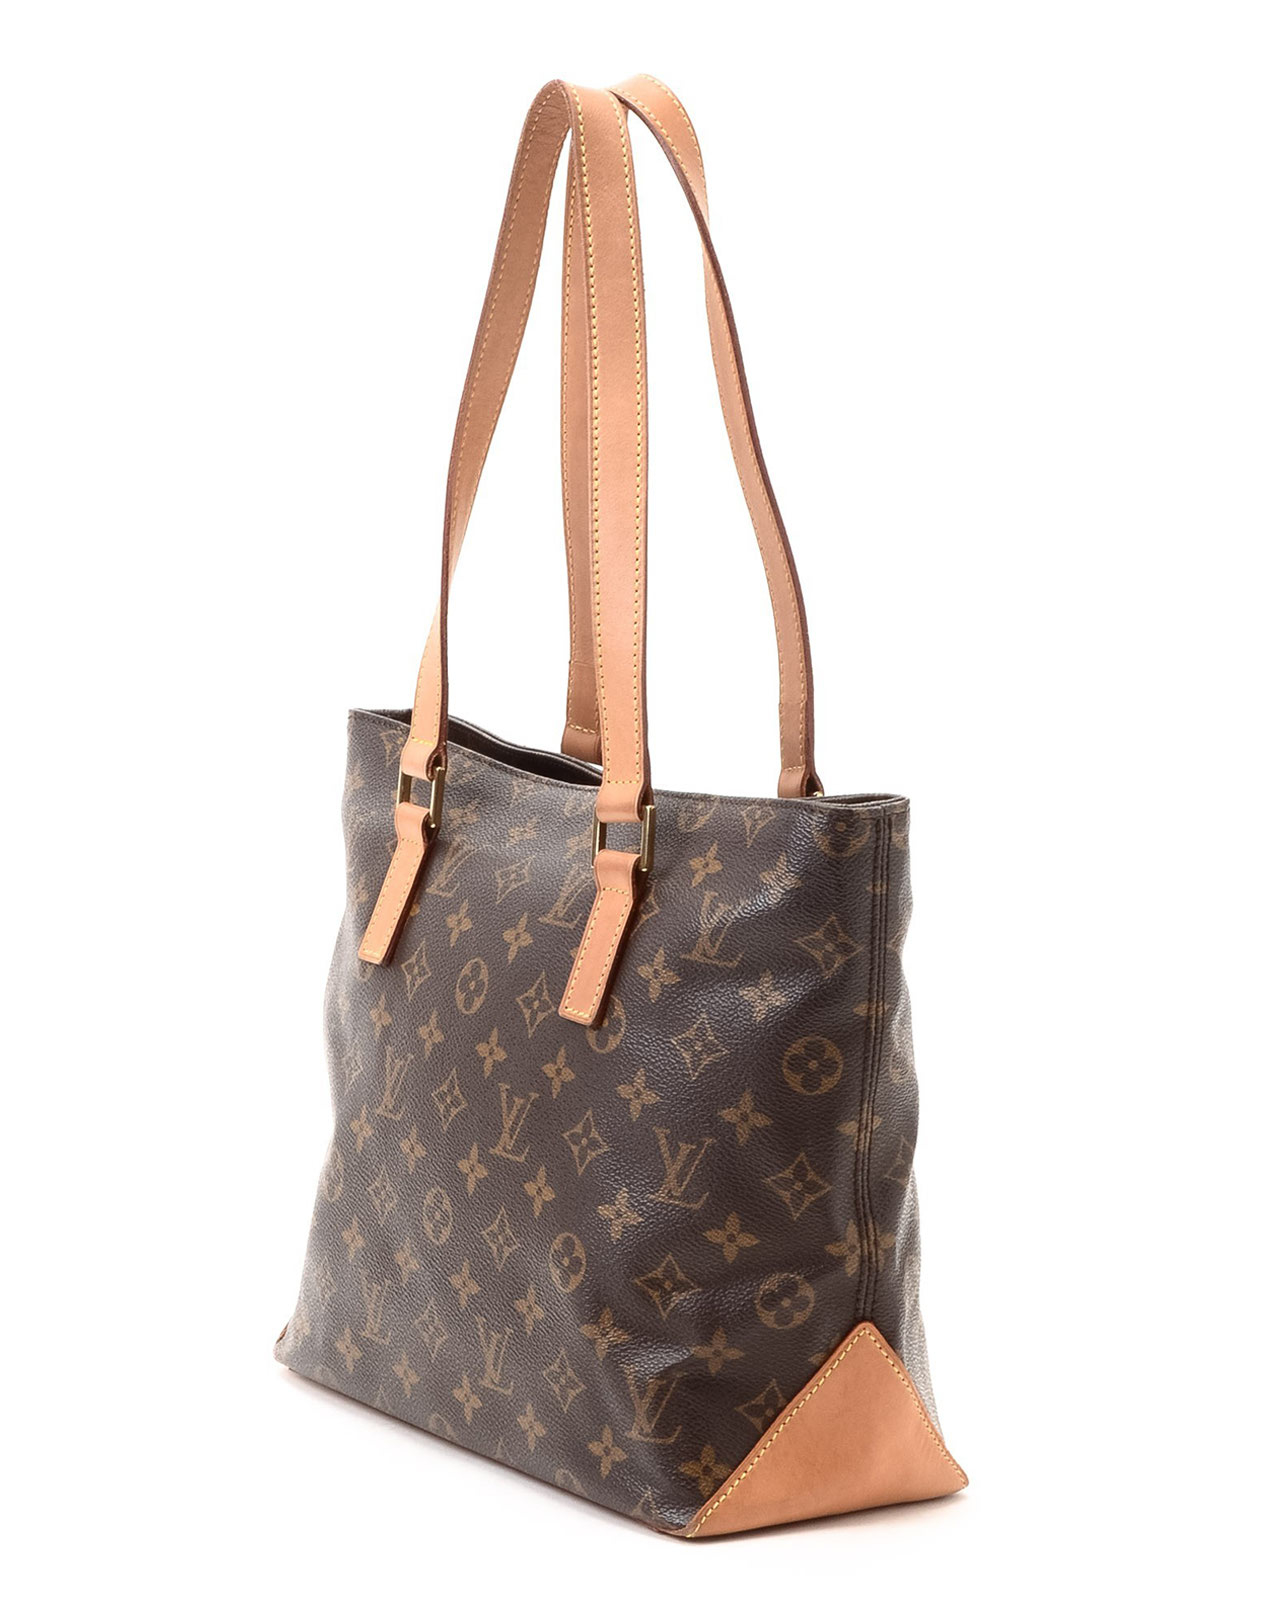 Lyst - Louis Vuitton Cabas Piano Tote in Brown